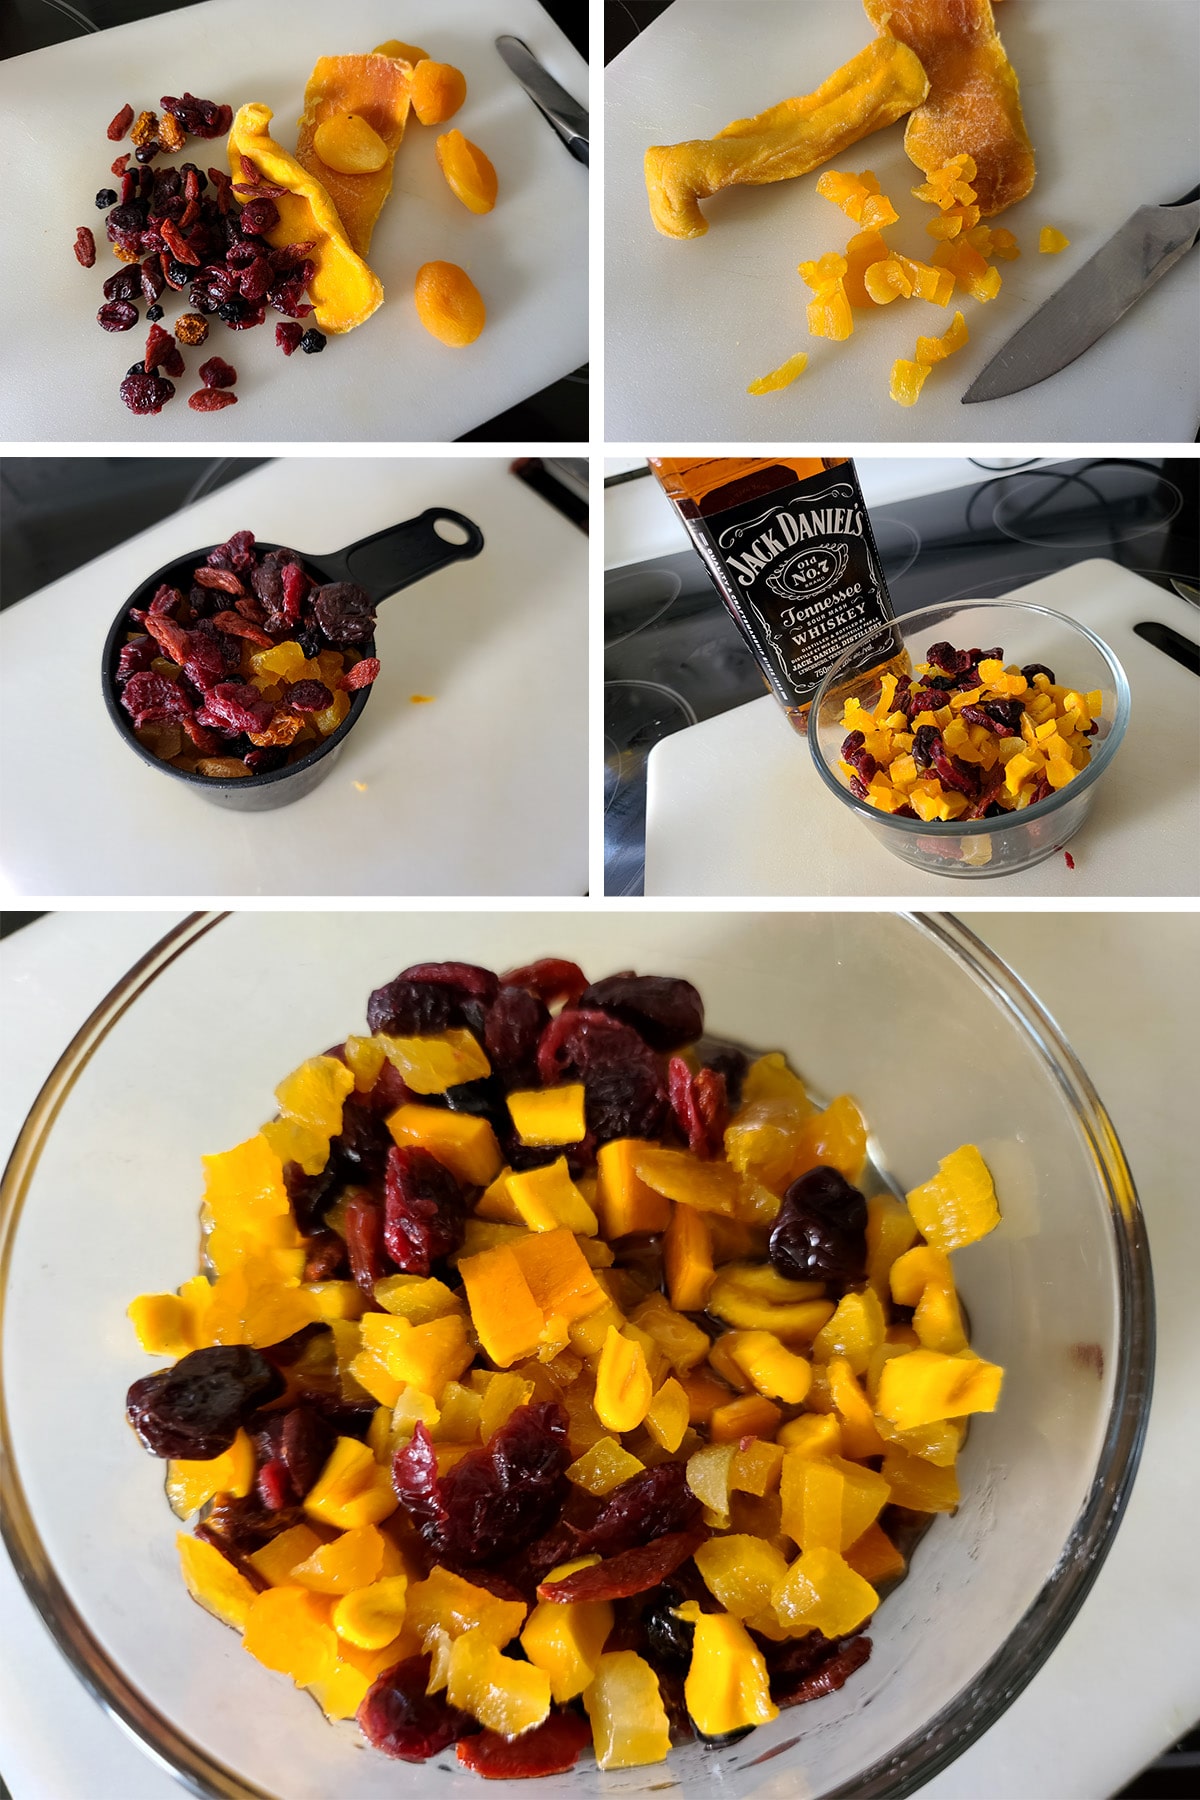 A 5 part image showing dried fruits being chopped up and added to a glass bowl with whisky.